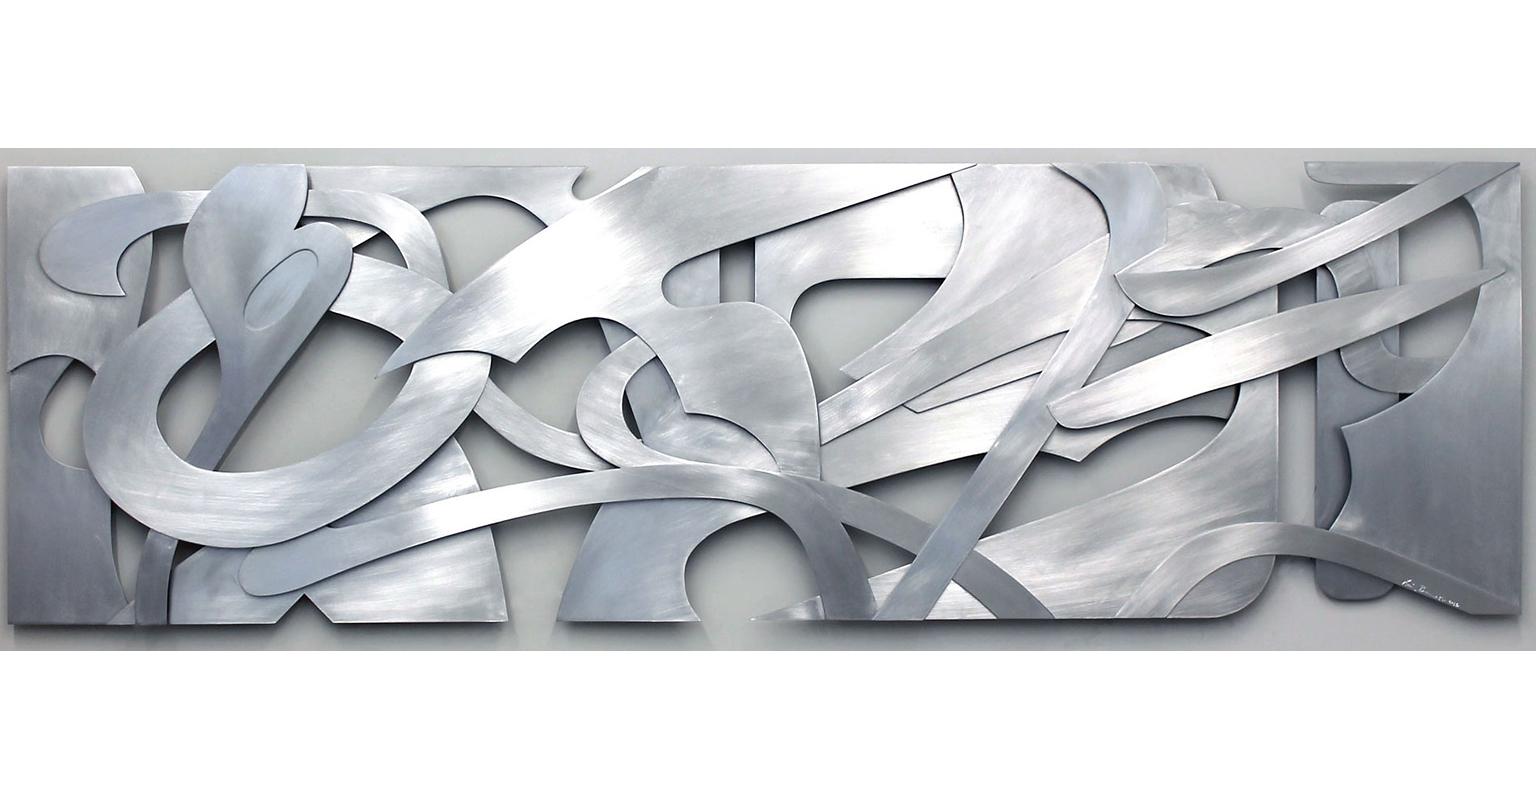 "Velocity" Abstract Metal Wall Relief Sculpture in Welded Aluminum, Contemporary